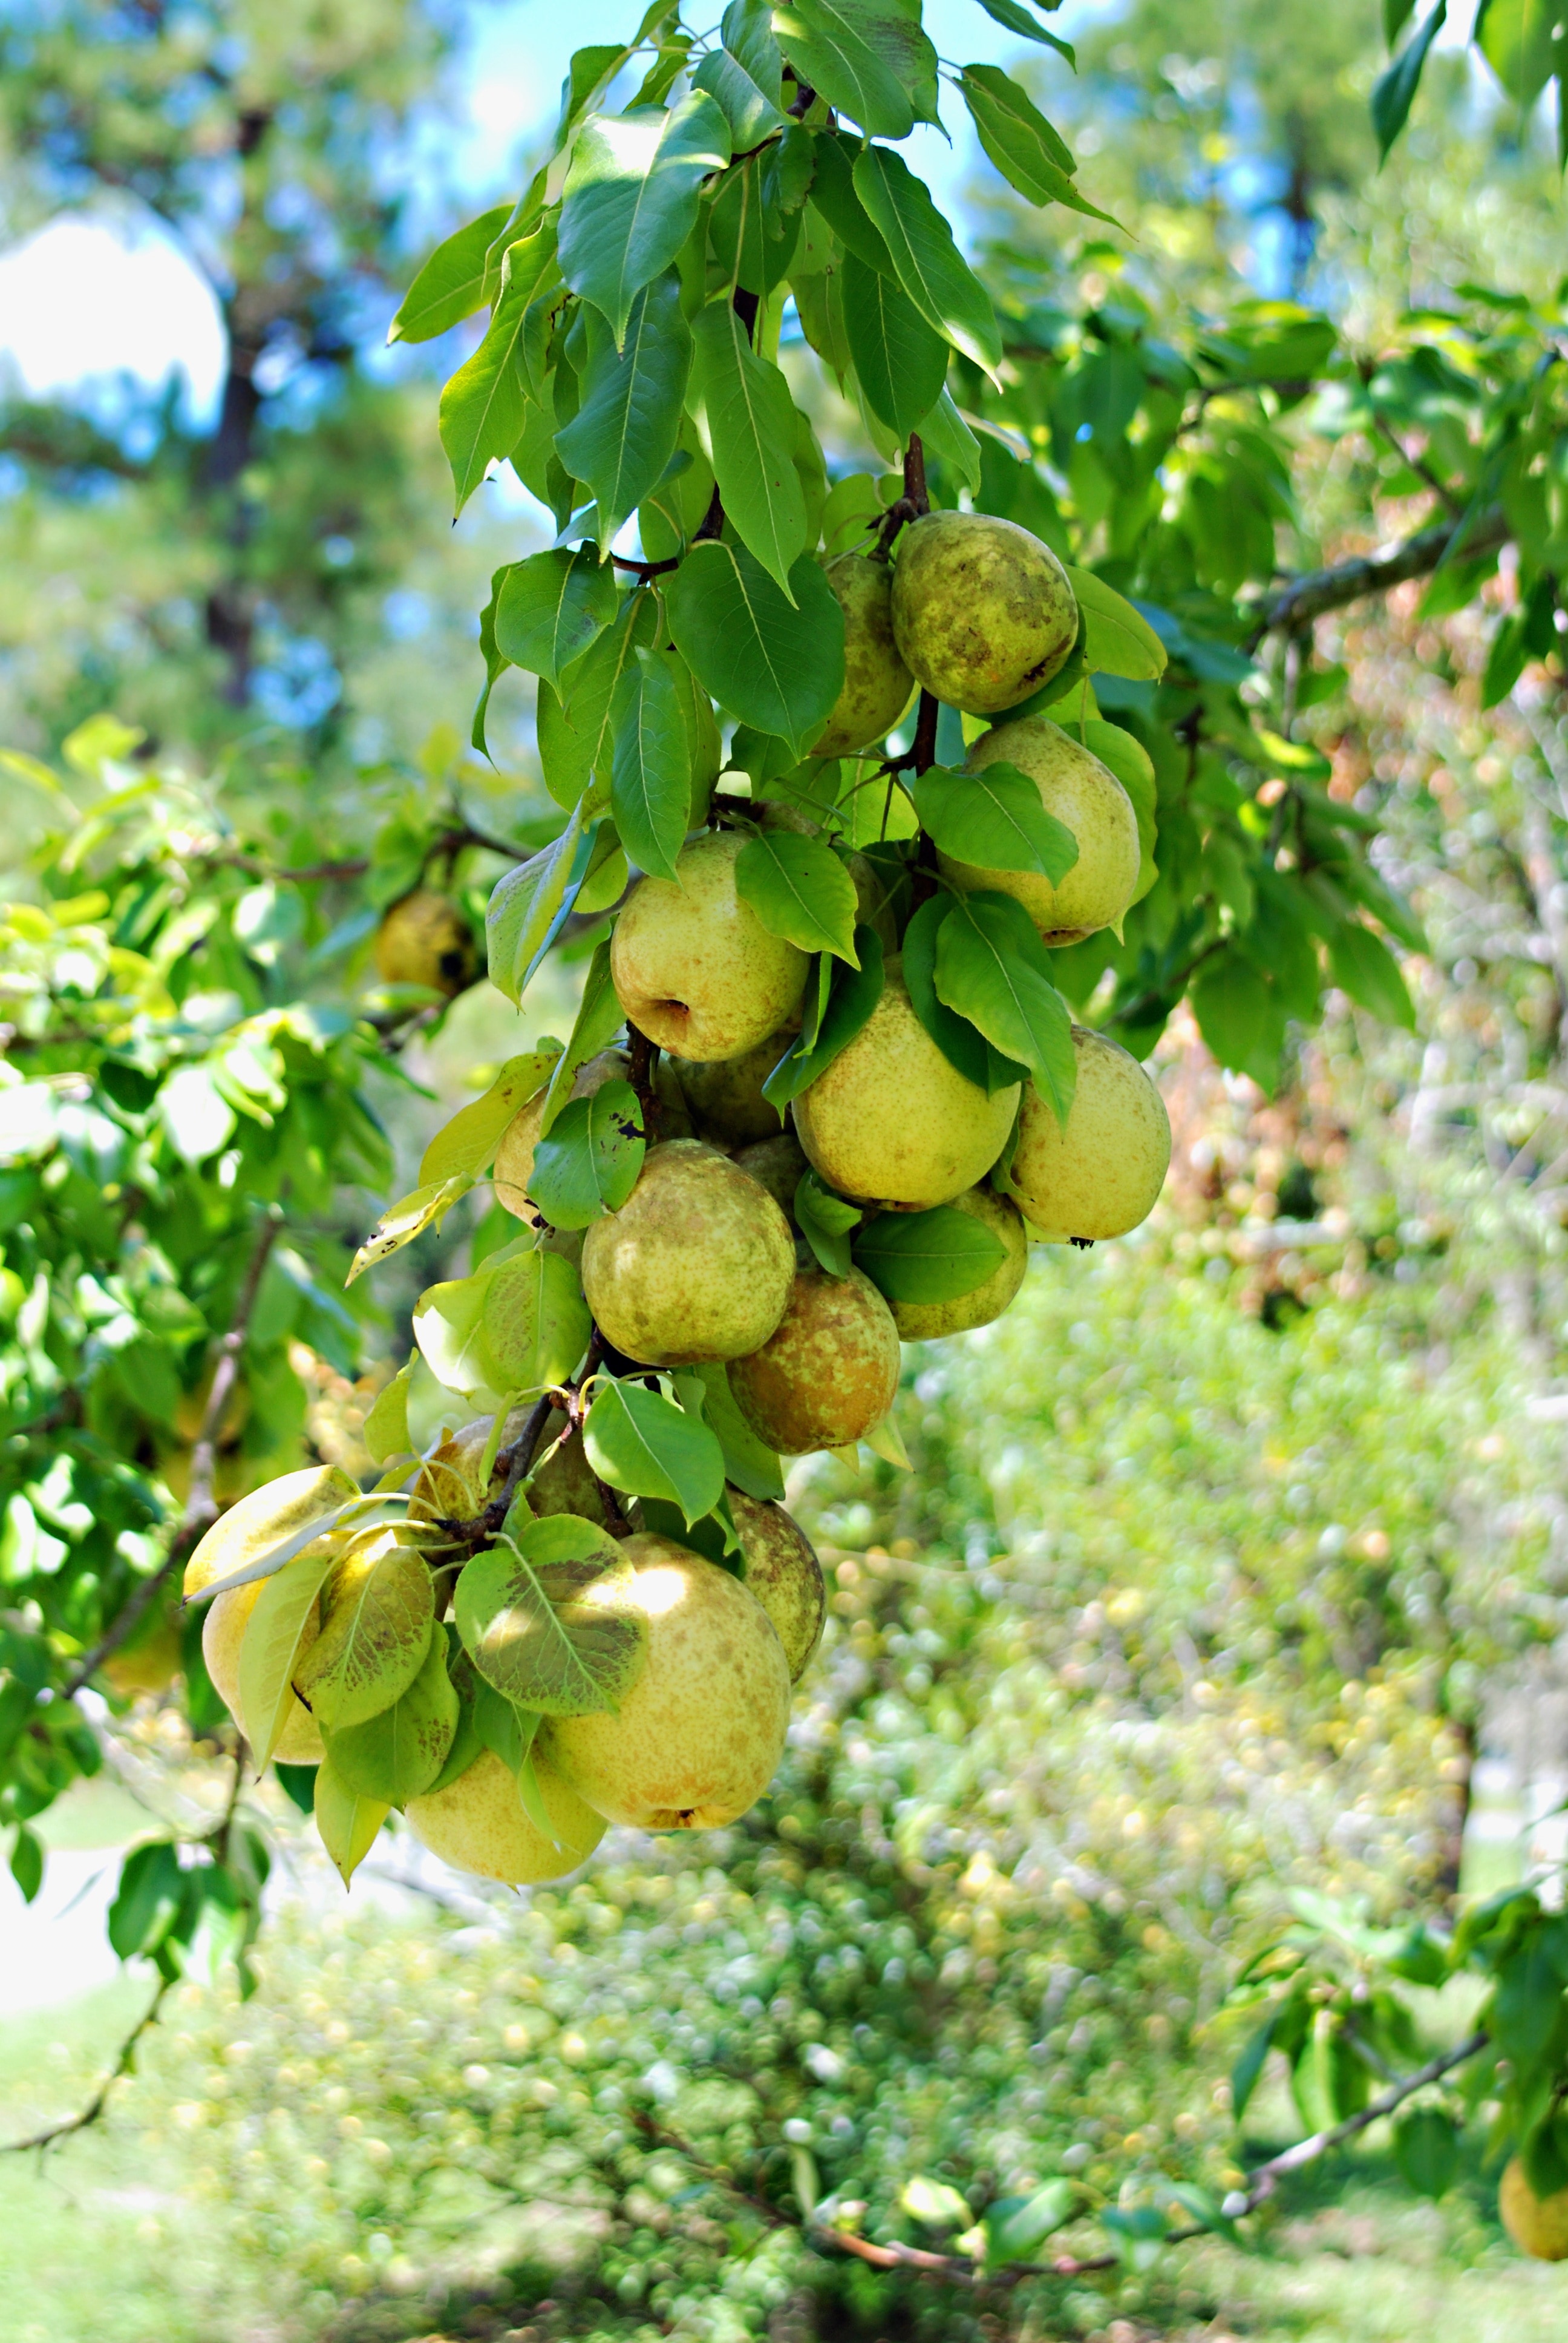 Tree, Pears, Freshness, Fruit, Colorful, fruit, growth